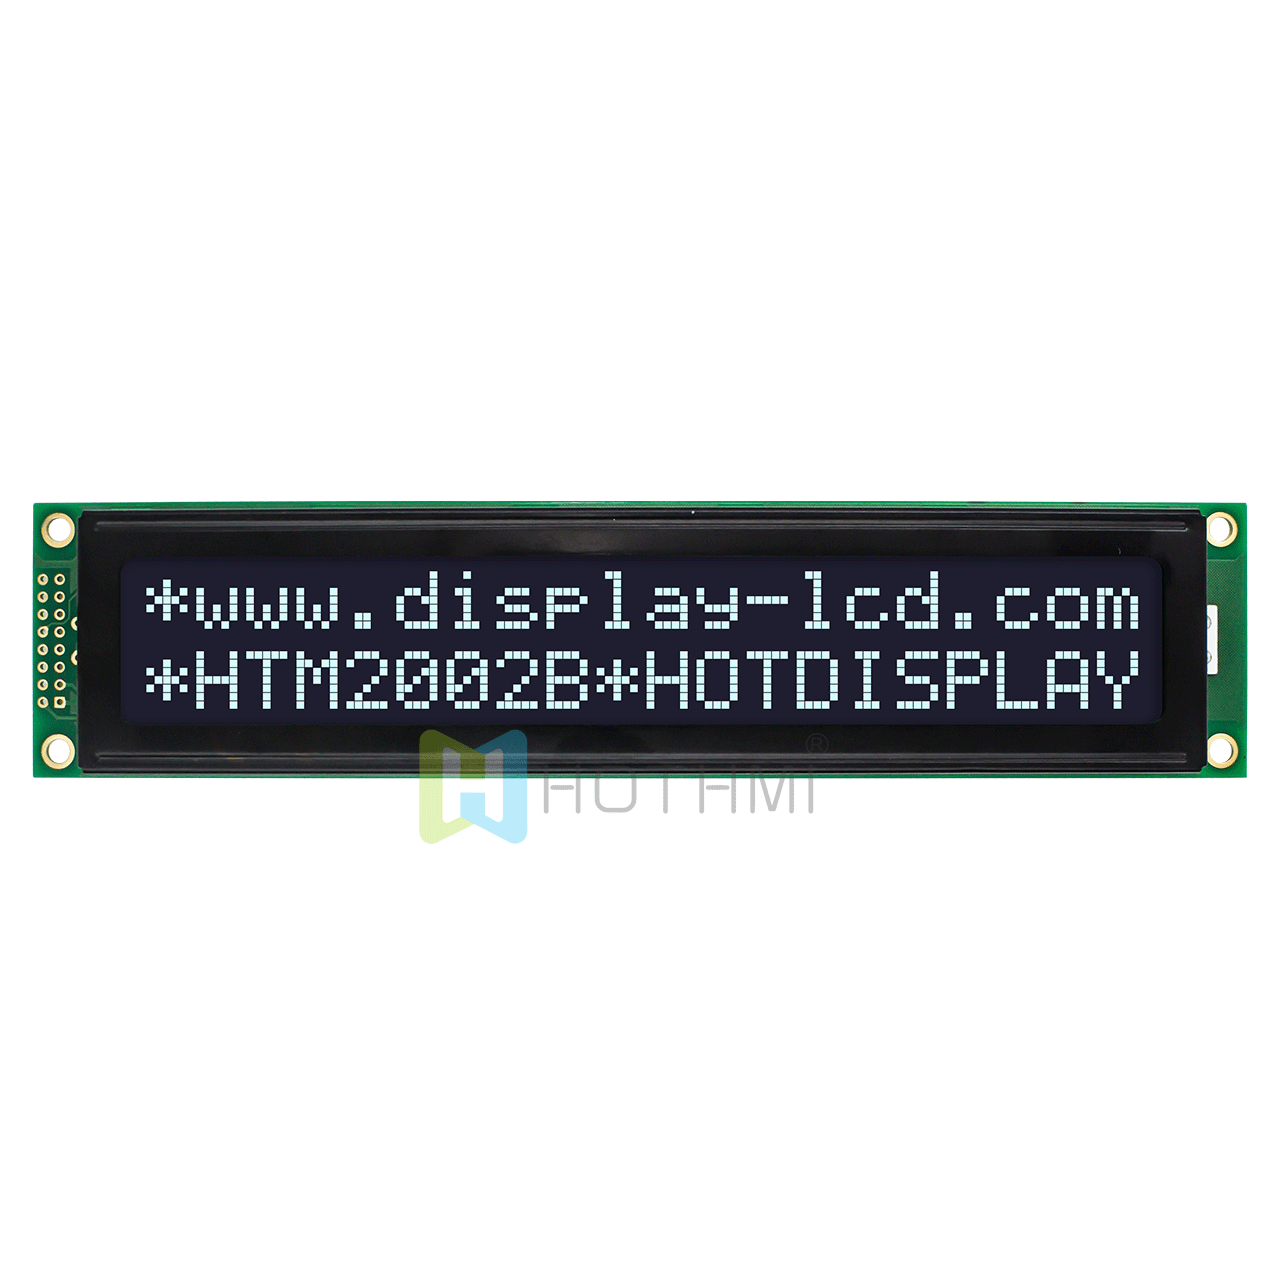 20X2 character monochrome LCD screen module/DSTN (-) negative display/white backlight/white characters on black background/5.0V/ST7066U control/Adruino/wide temperature display/wide viewing angle display